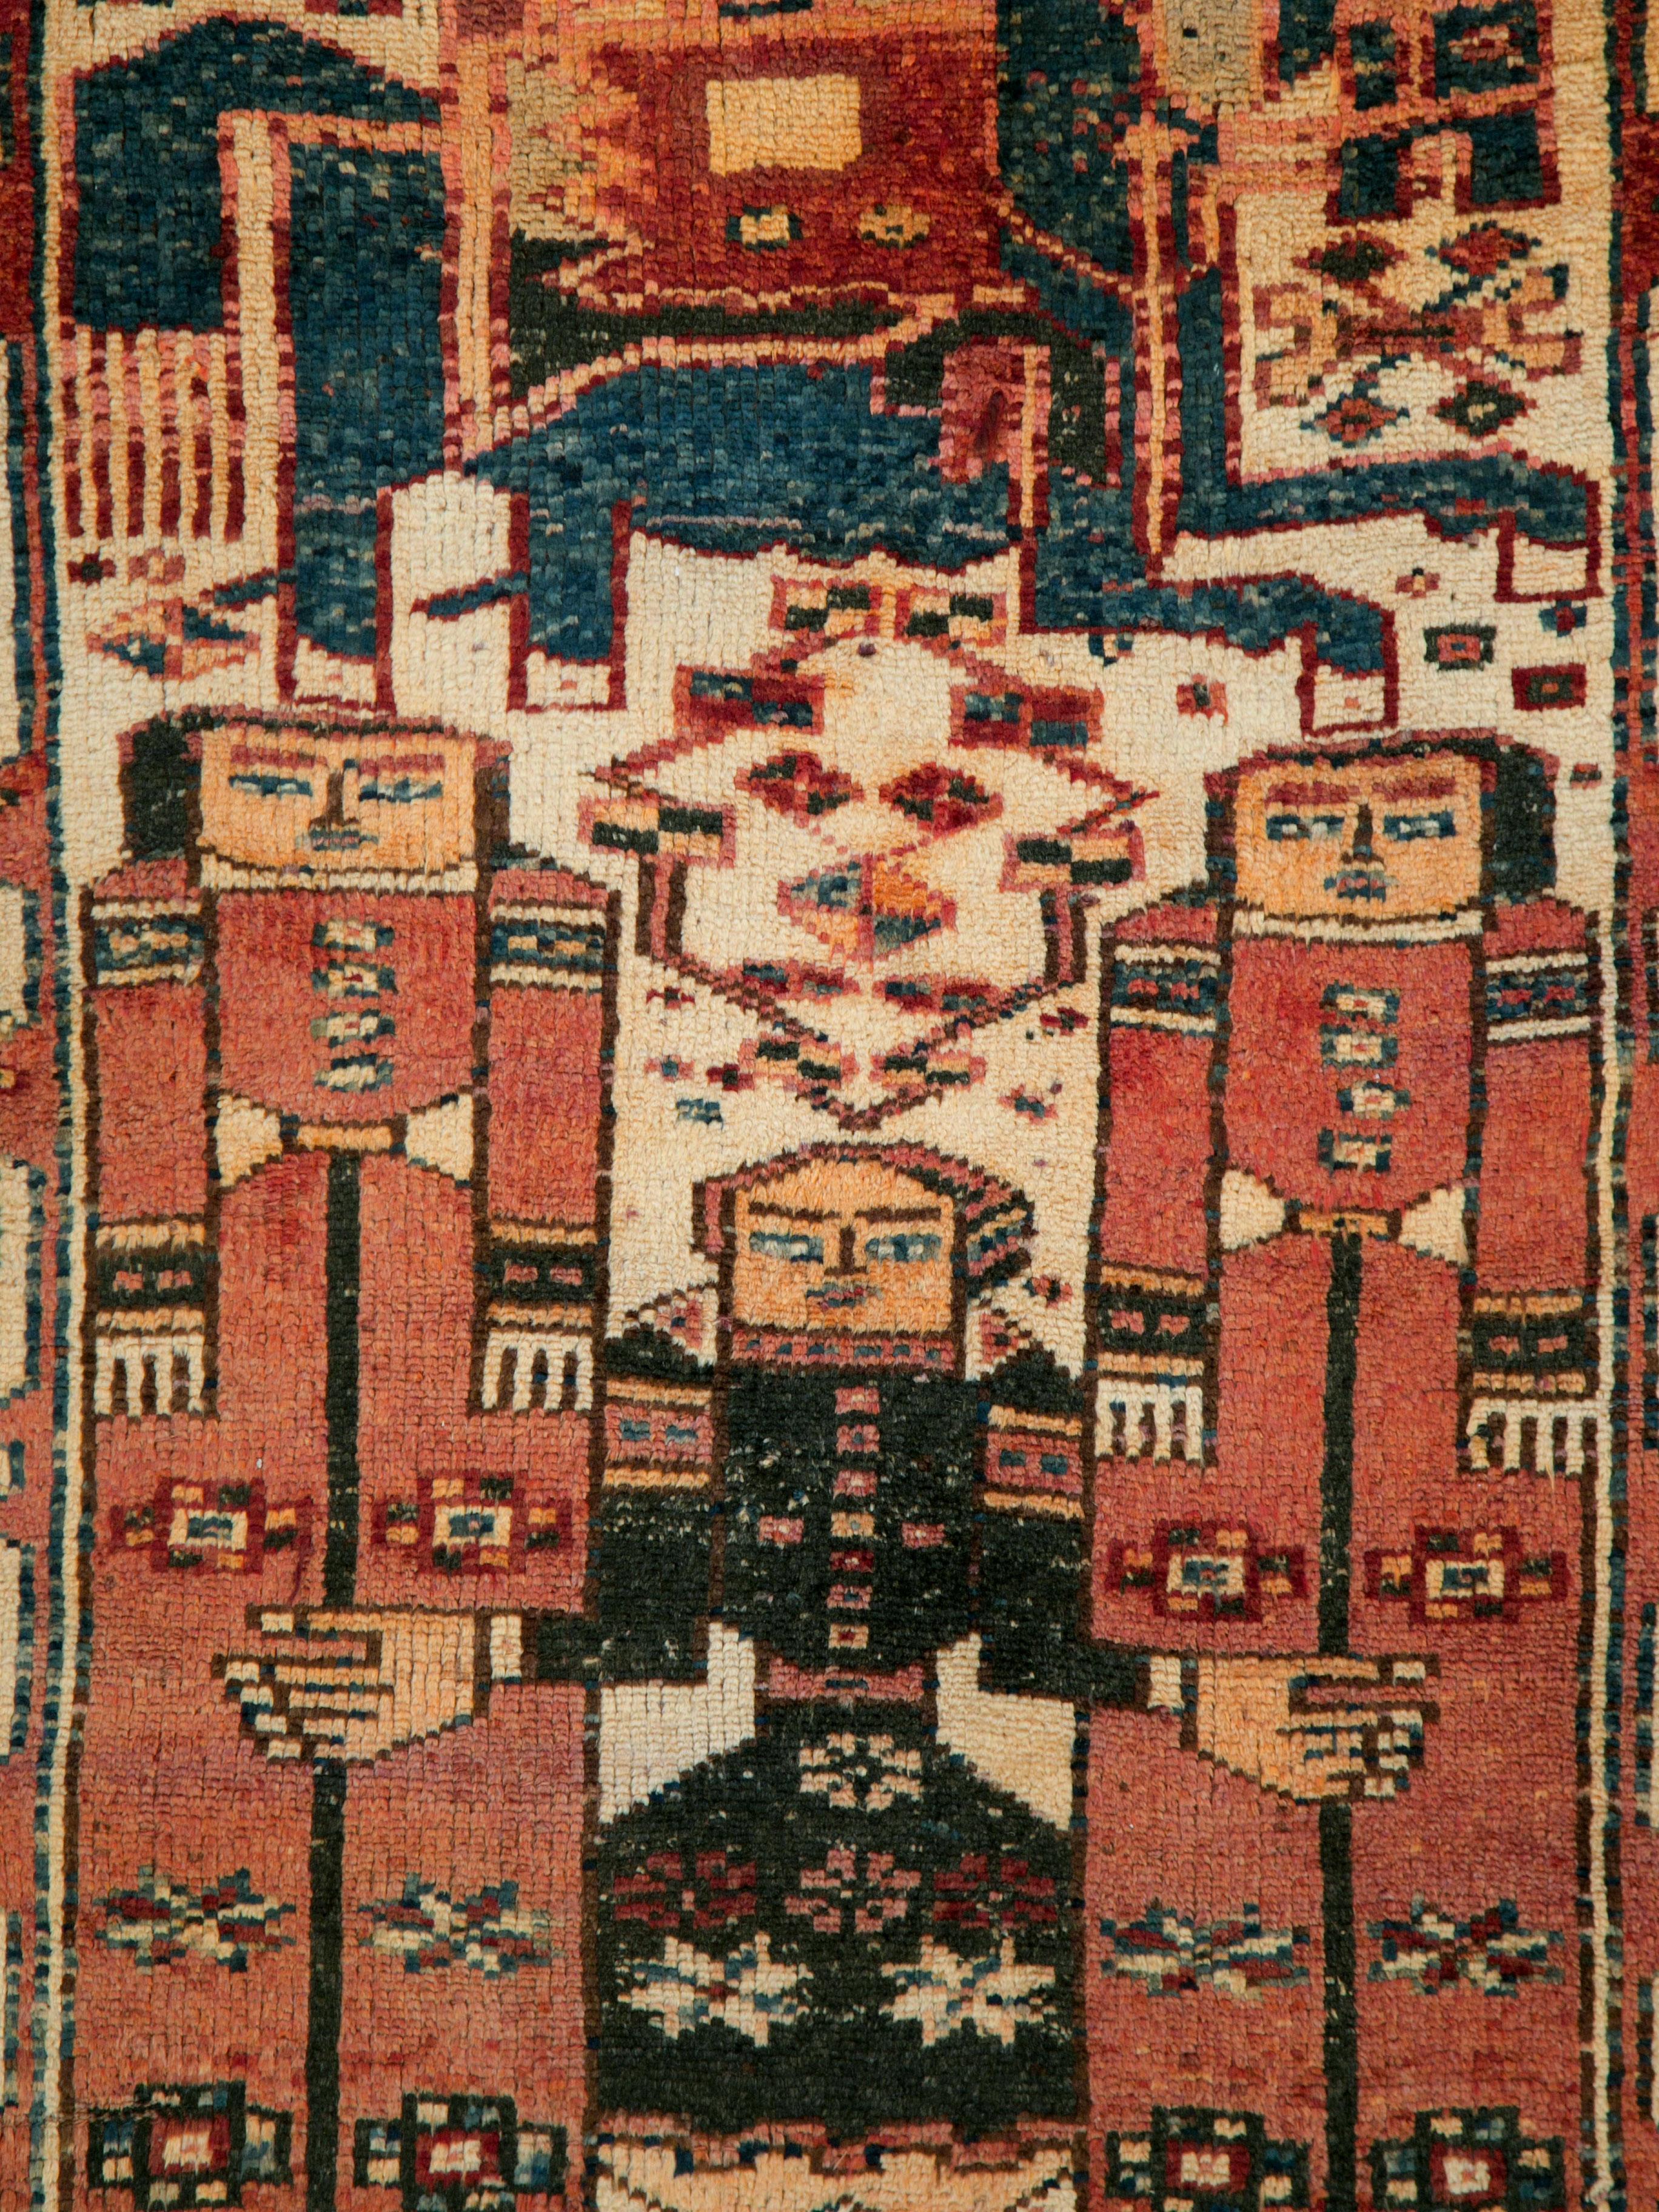 A vintage Persian Bakhtiari rug from the mid-20th century woven in the gallery format. The semi-geometric pictorial design and color palette offers a tribal and rustic appeal.